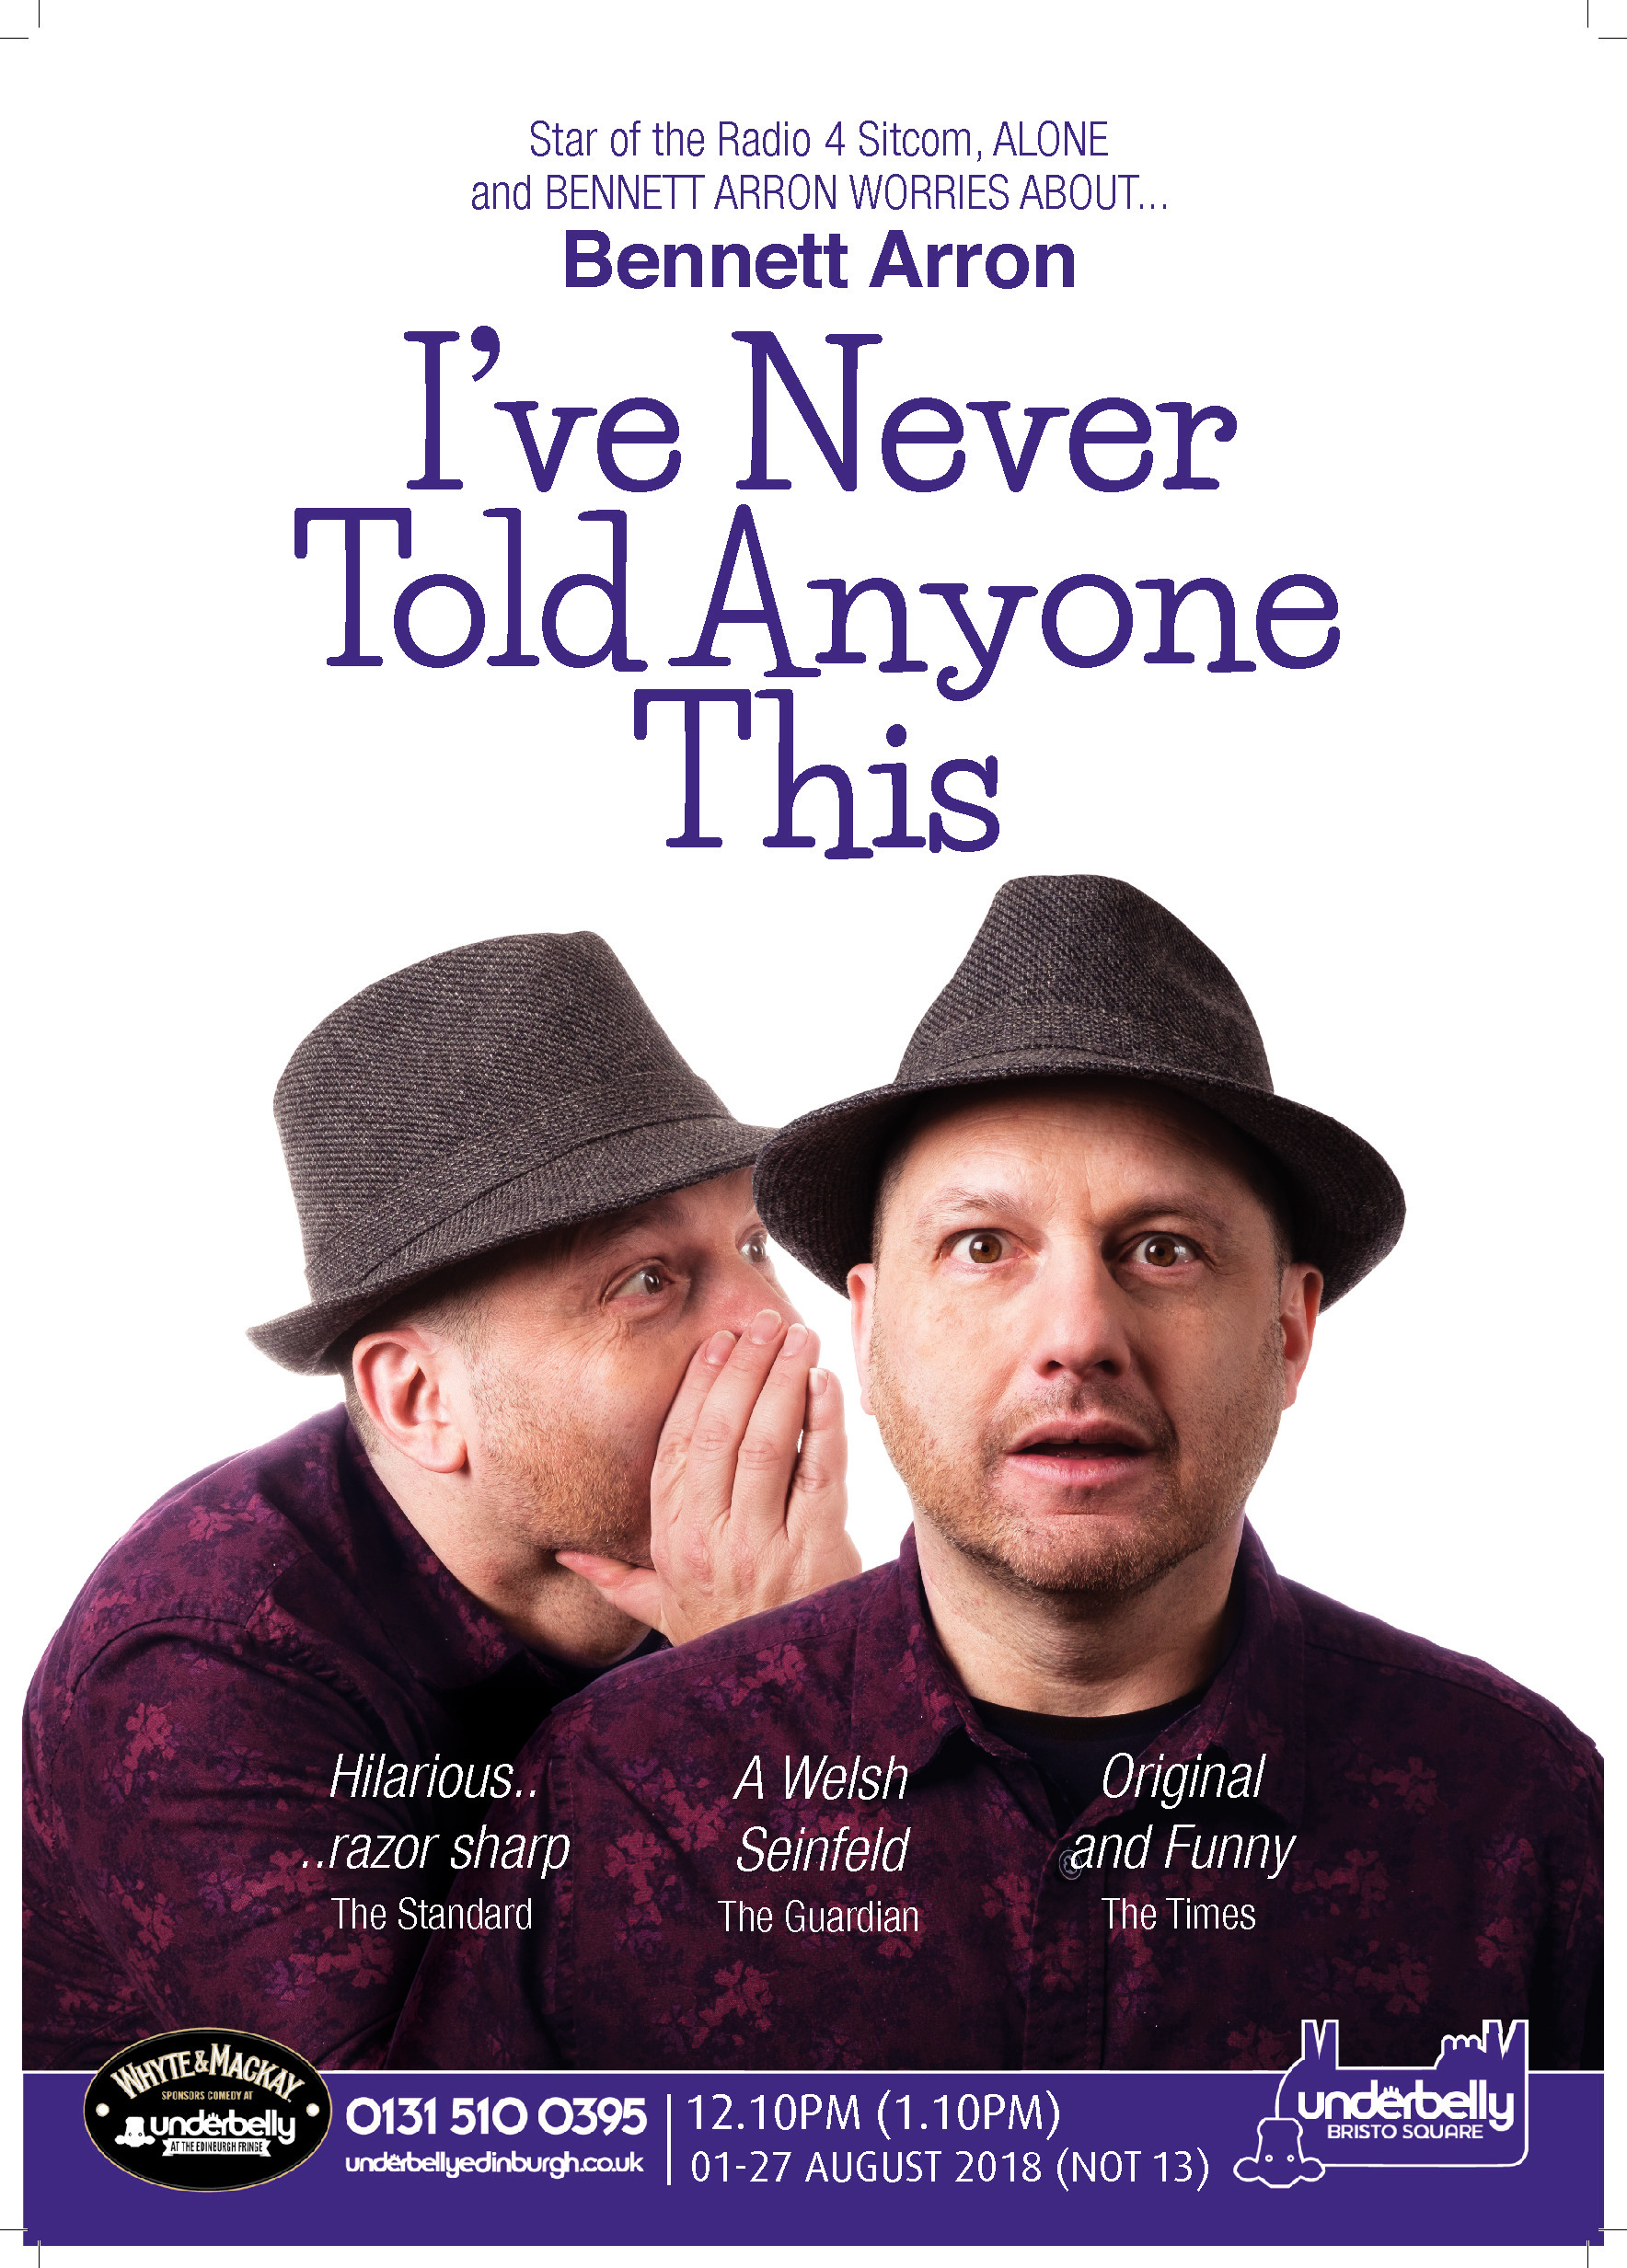 The poster for Bennett Arron: I've Never Told Anyone This